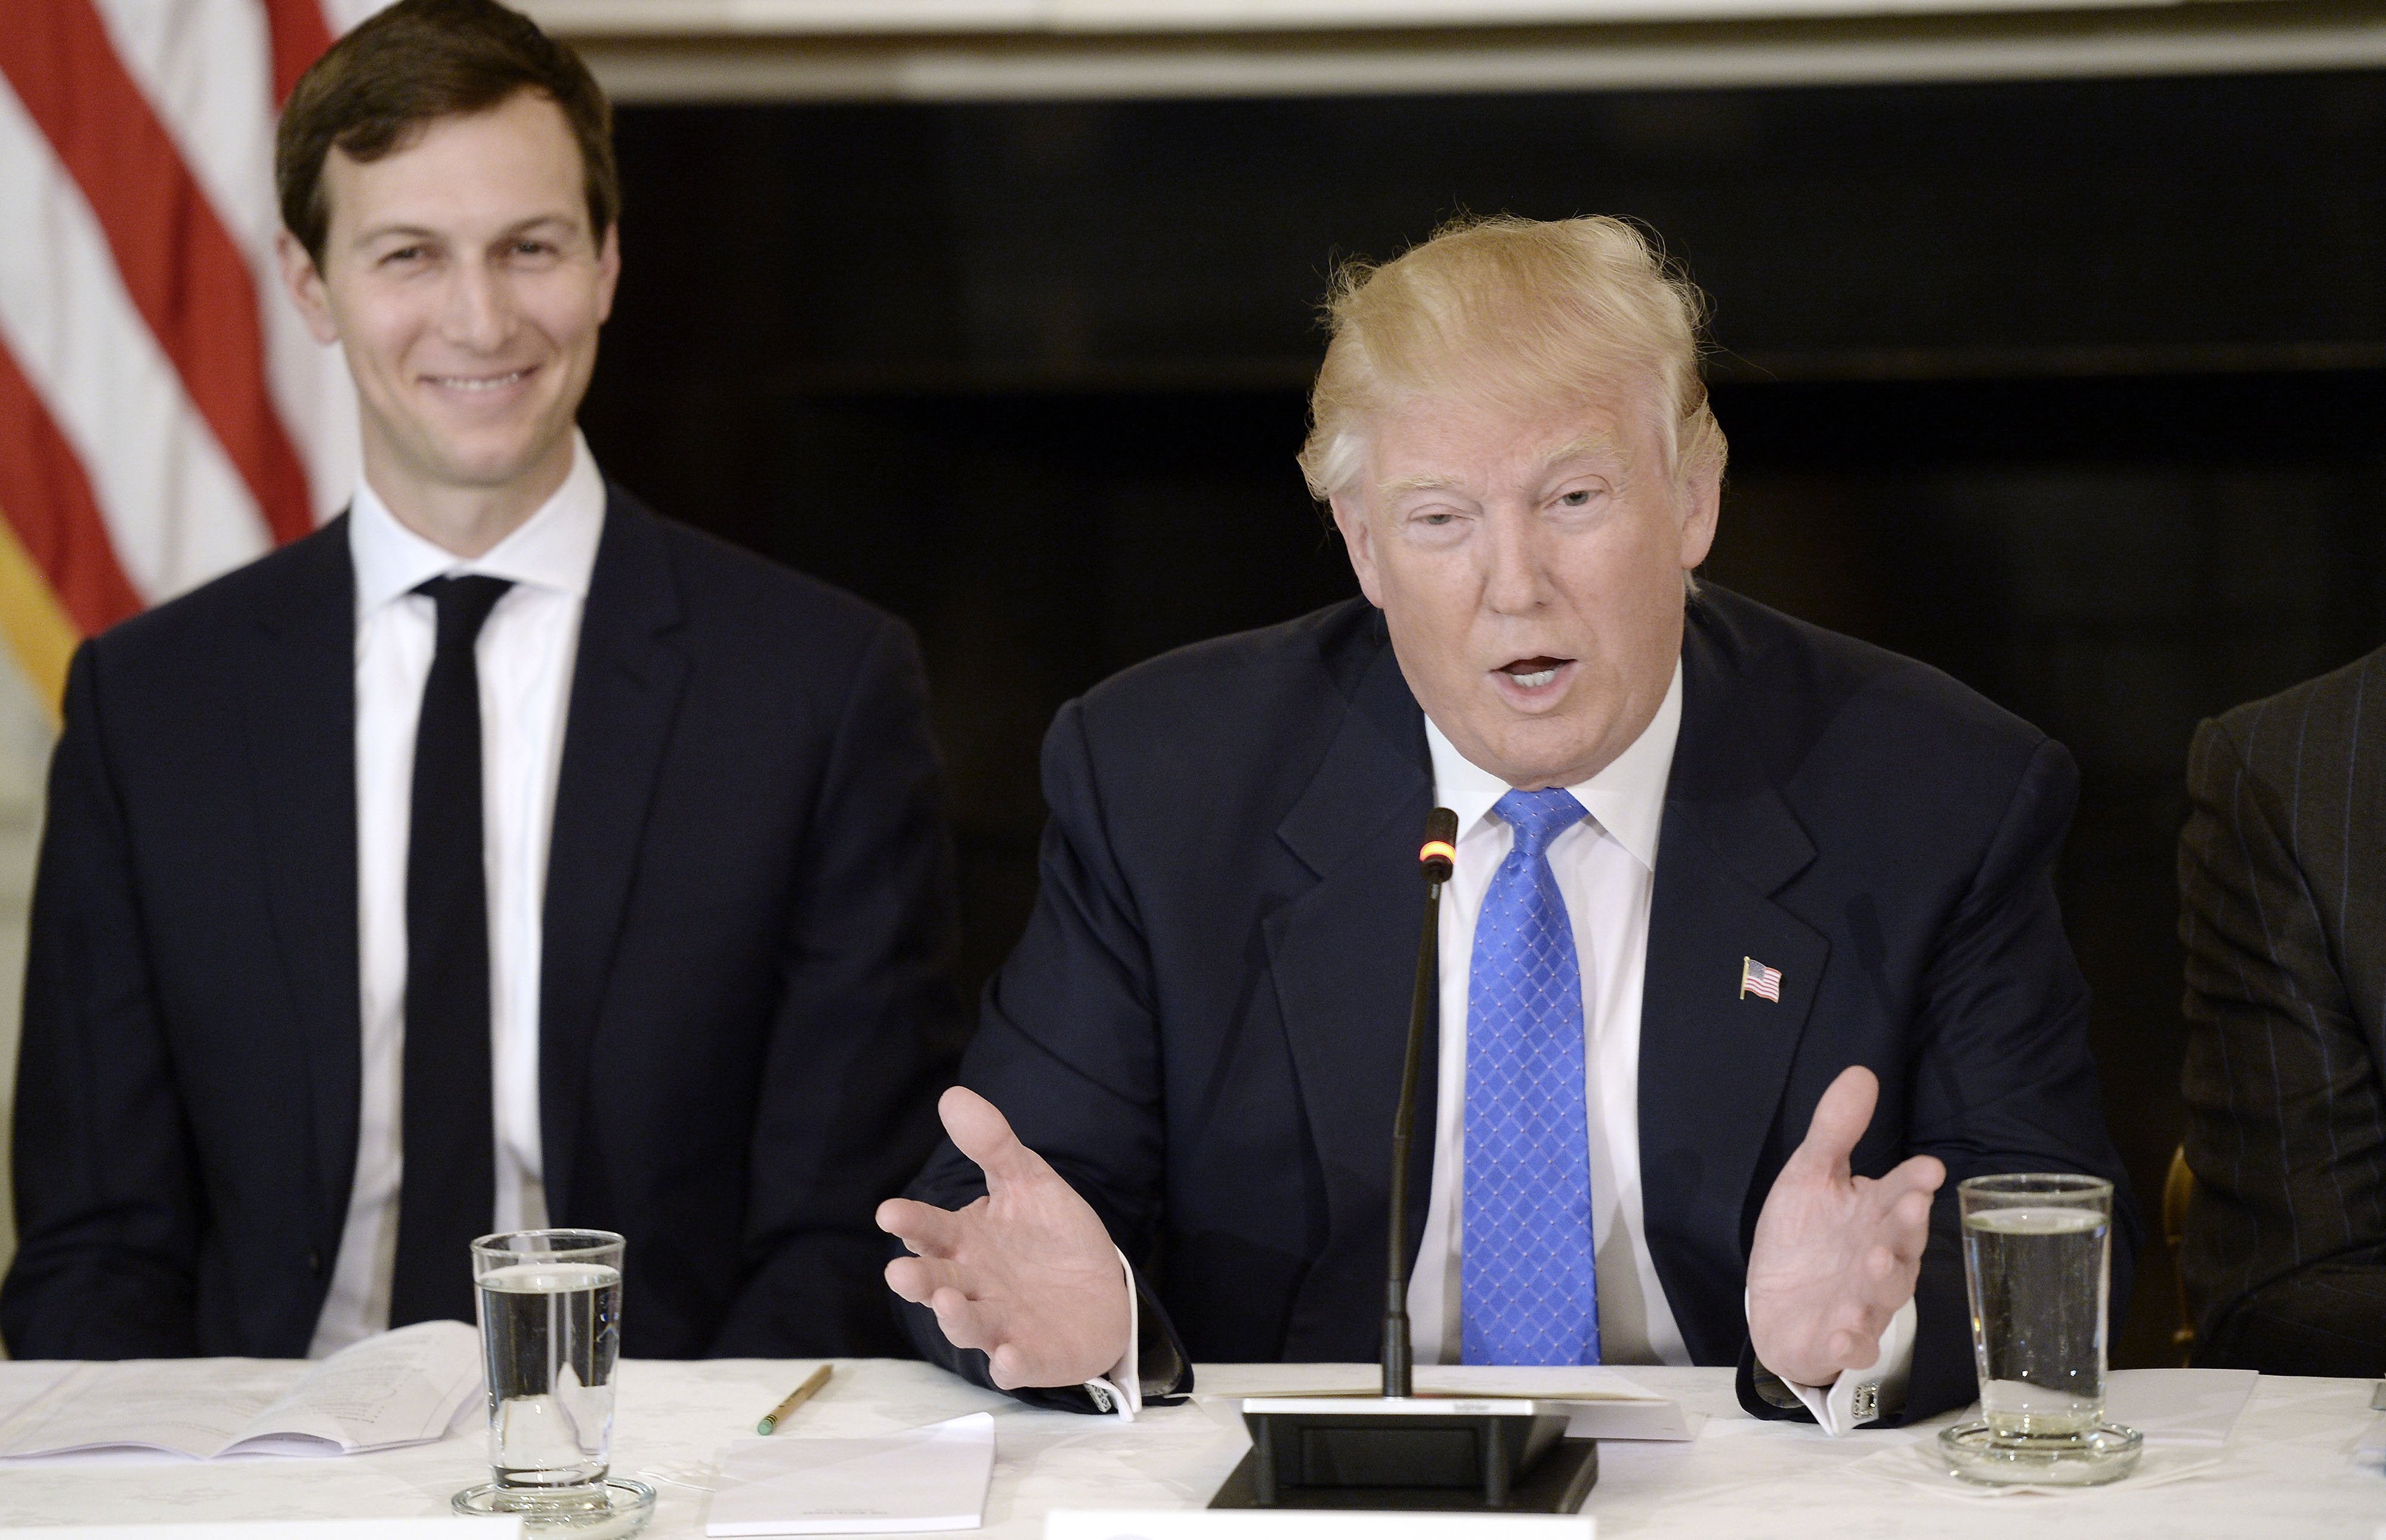 Trump Creates New White House Office Headed By His Son-in-Law Jared Kushner